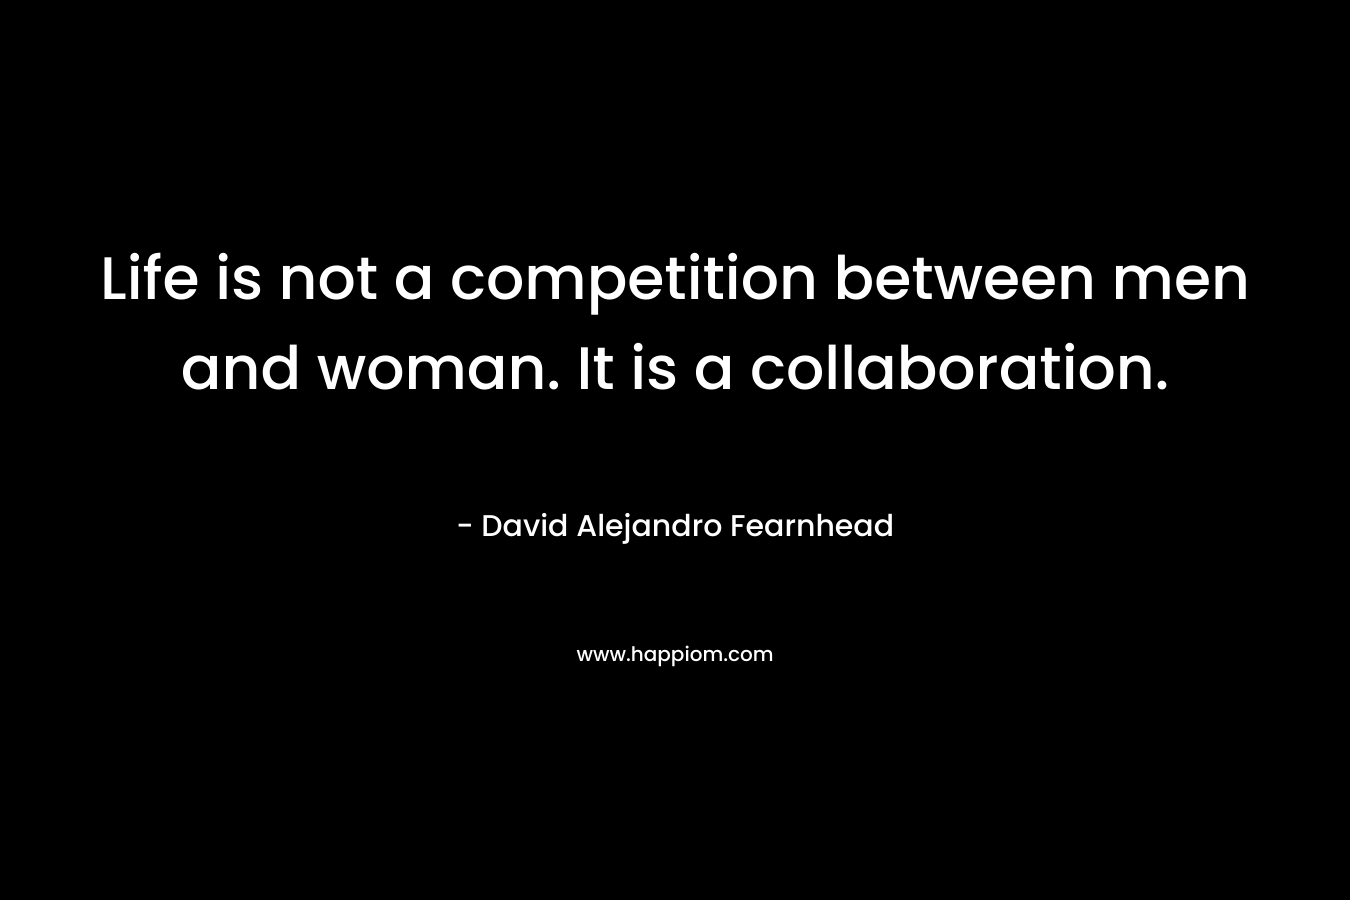 Life is not a competition between men and woman. It is a collaboration.